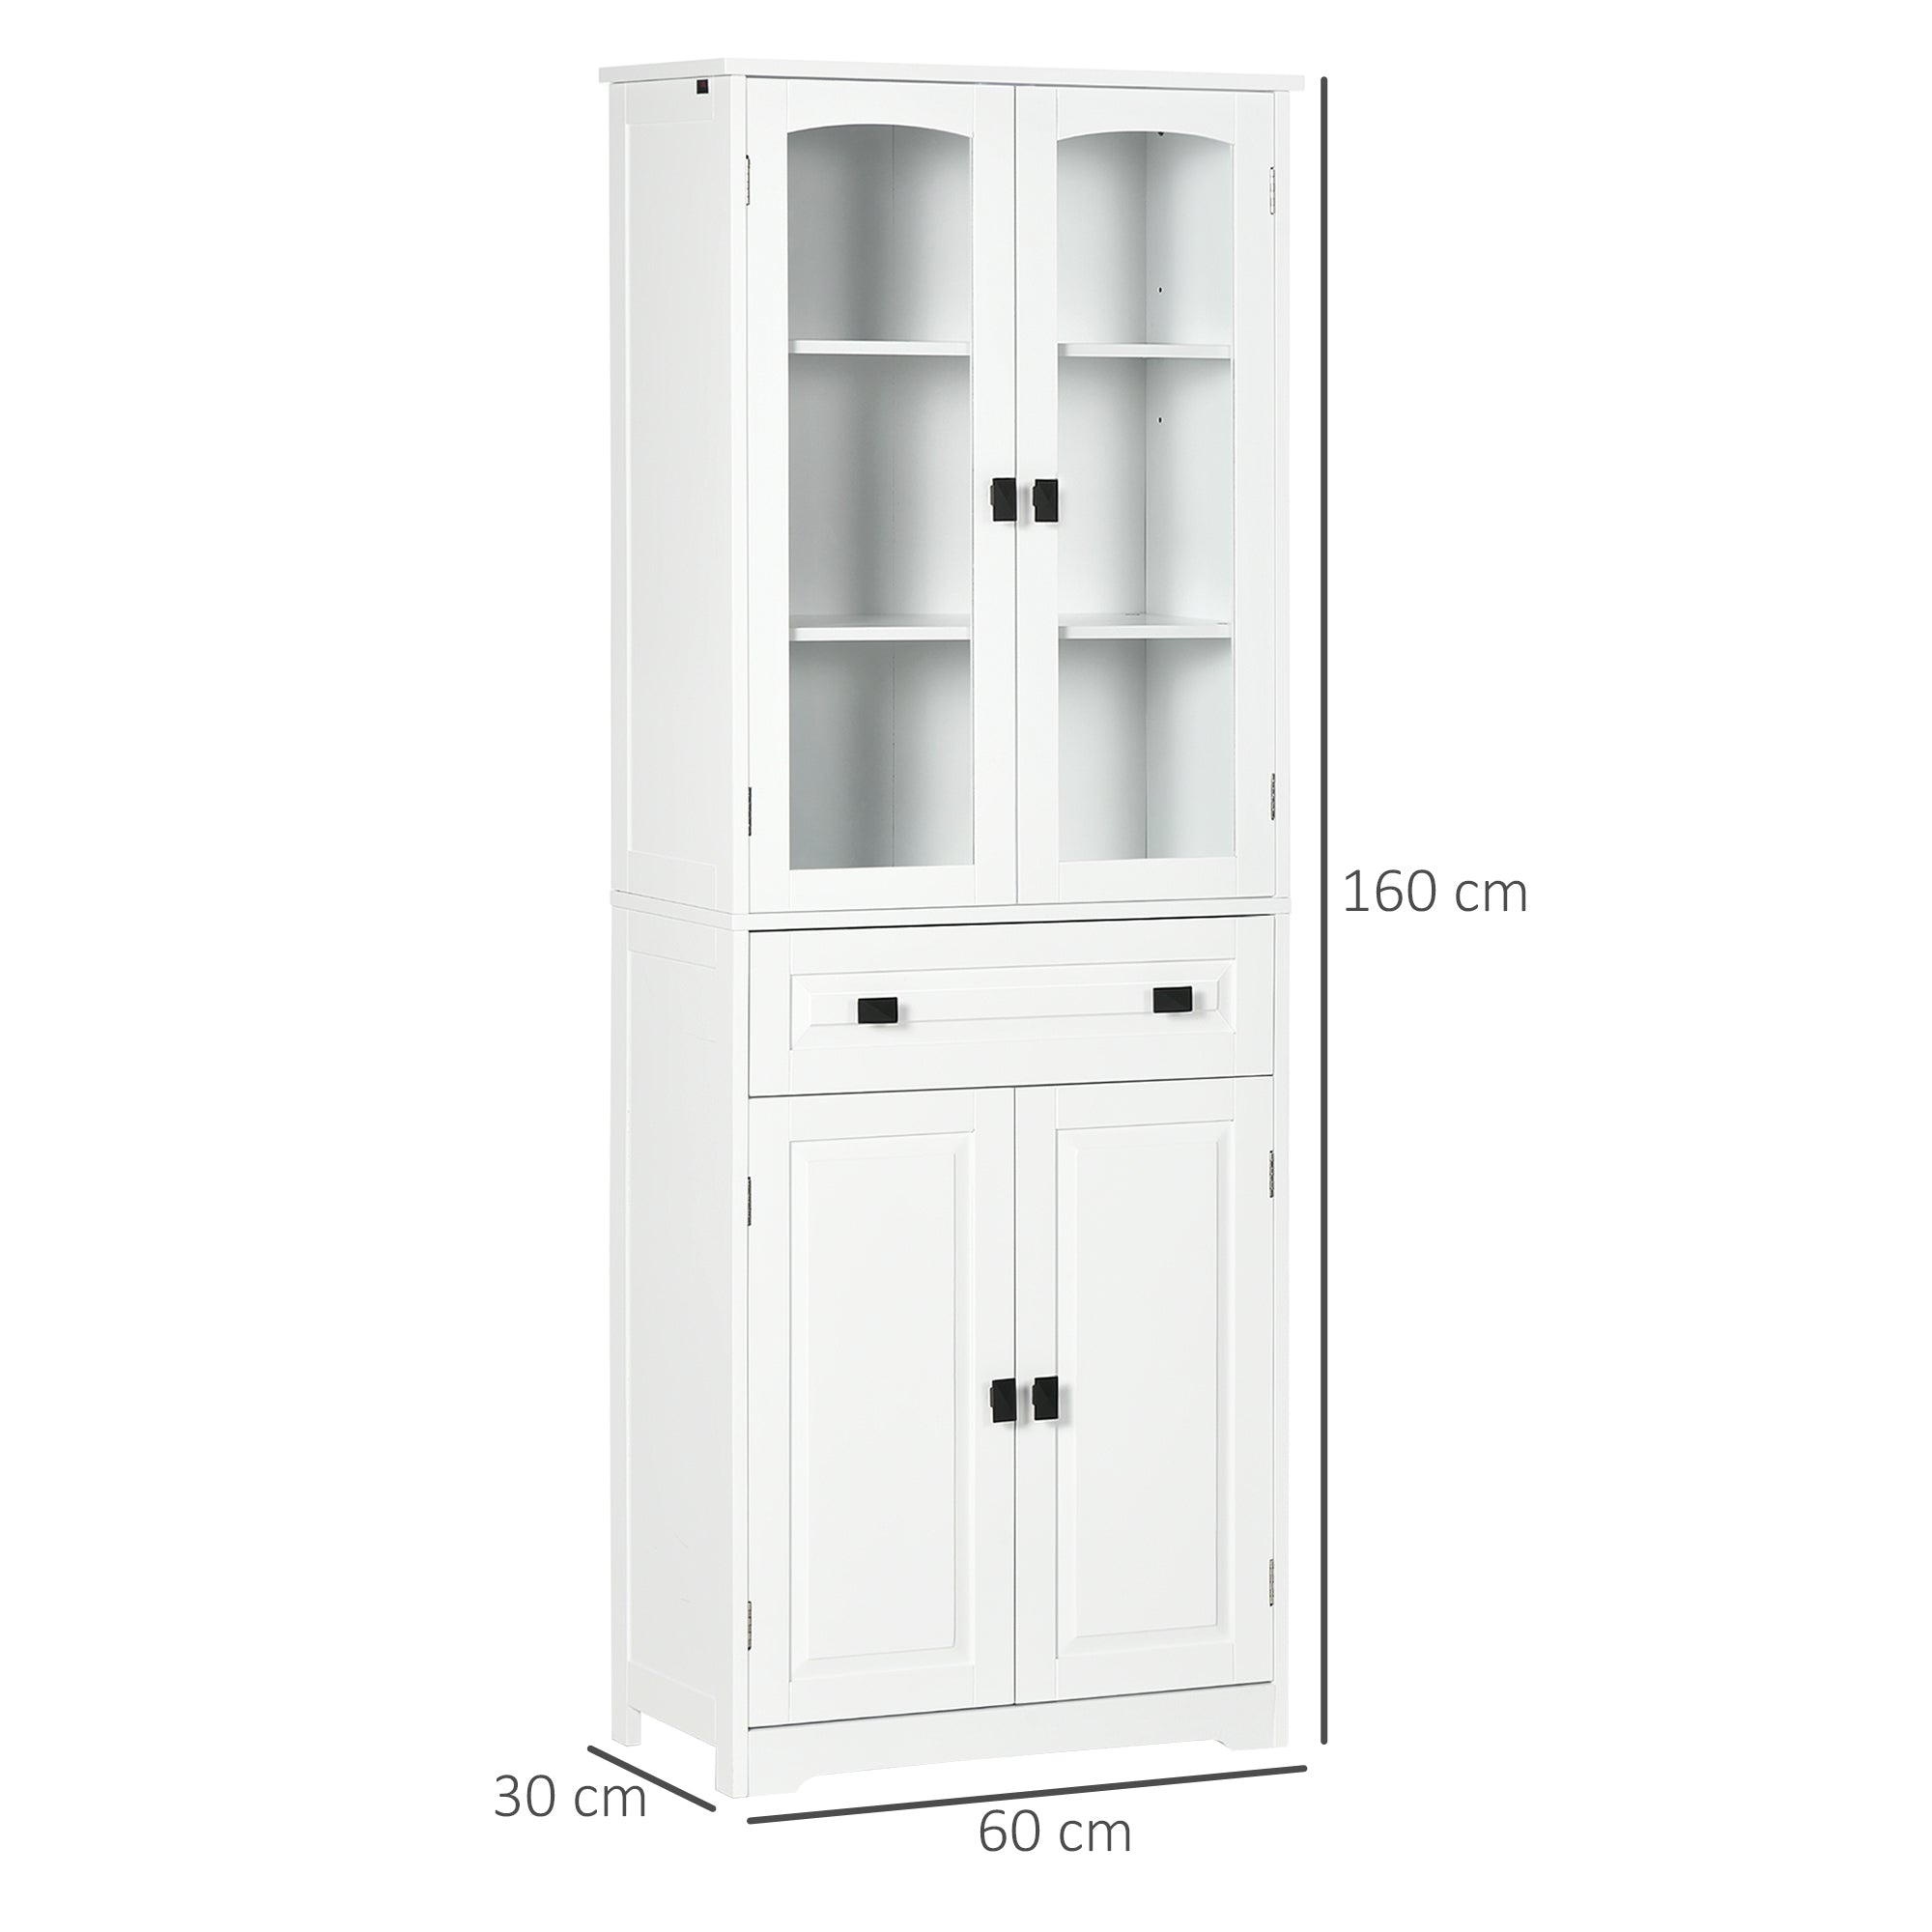 Kitchen Cupboard, Freestanding Storage Cabinet with 2 Adjustable Shelves, Drawer and Glass Door for Living Room, Dining Room, 160cm, White-2